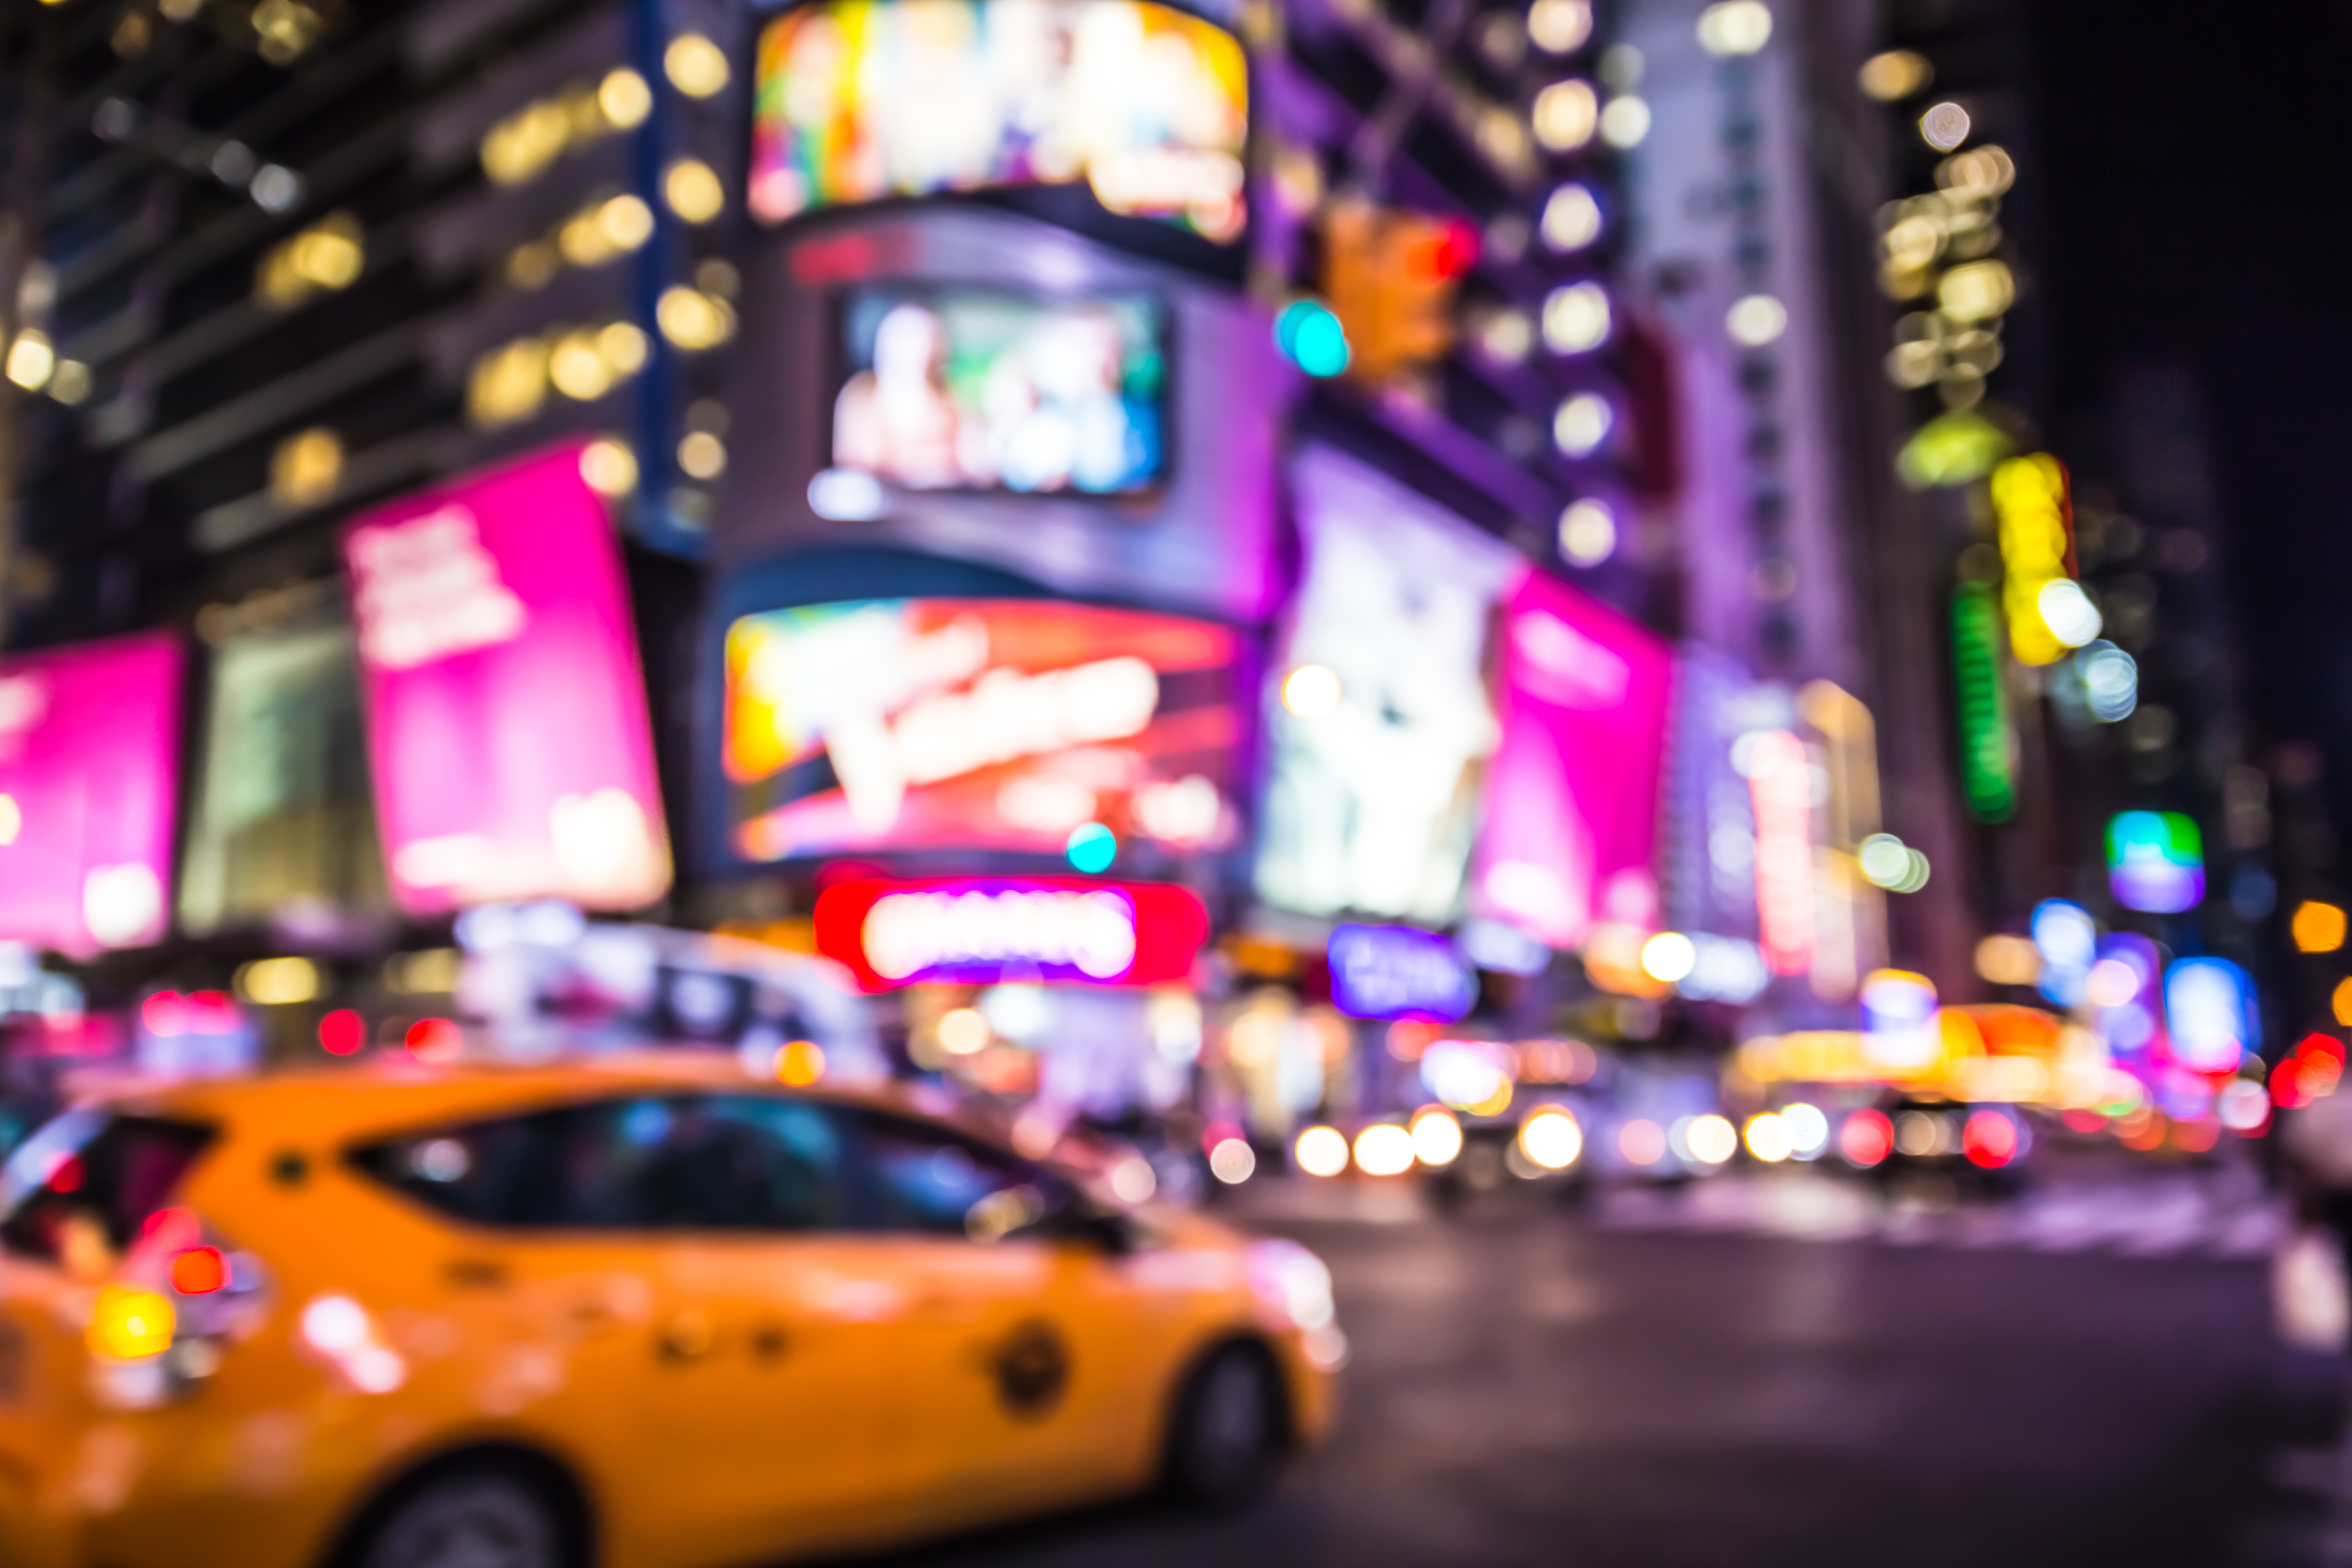 Defocused blur of Times Square in New York City with lights at night and taxi cab